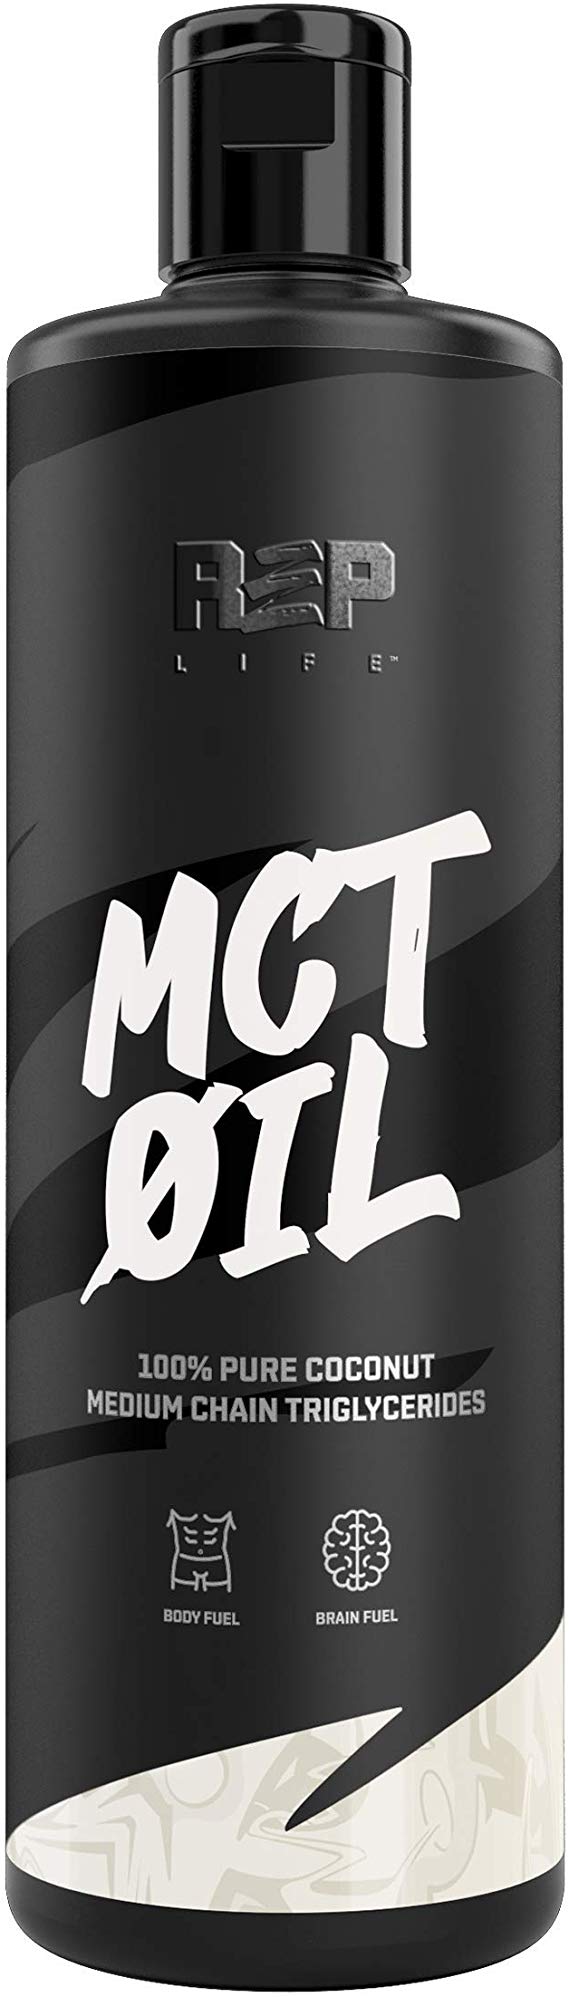 R3P Life | MCT Oil | Coconut-Based 100% Pure C8 and C10 MCTs, Weight Loss Supplement | Keto, Paleo, Non-GMO (16fl. oz)